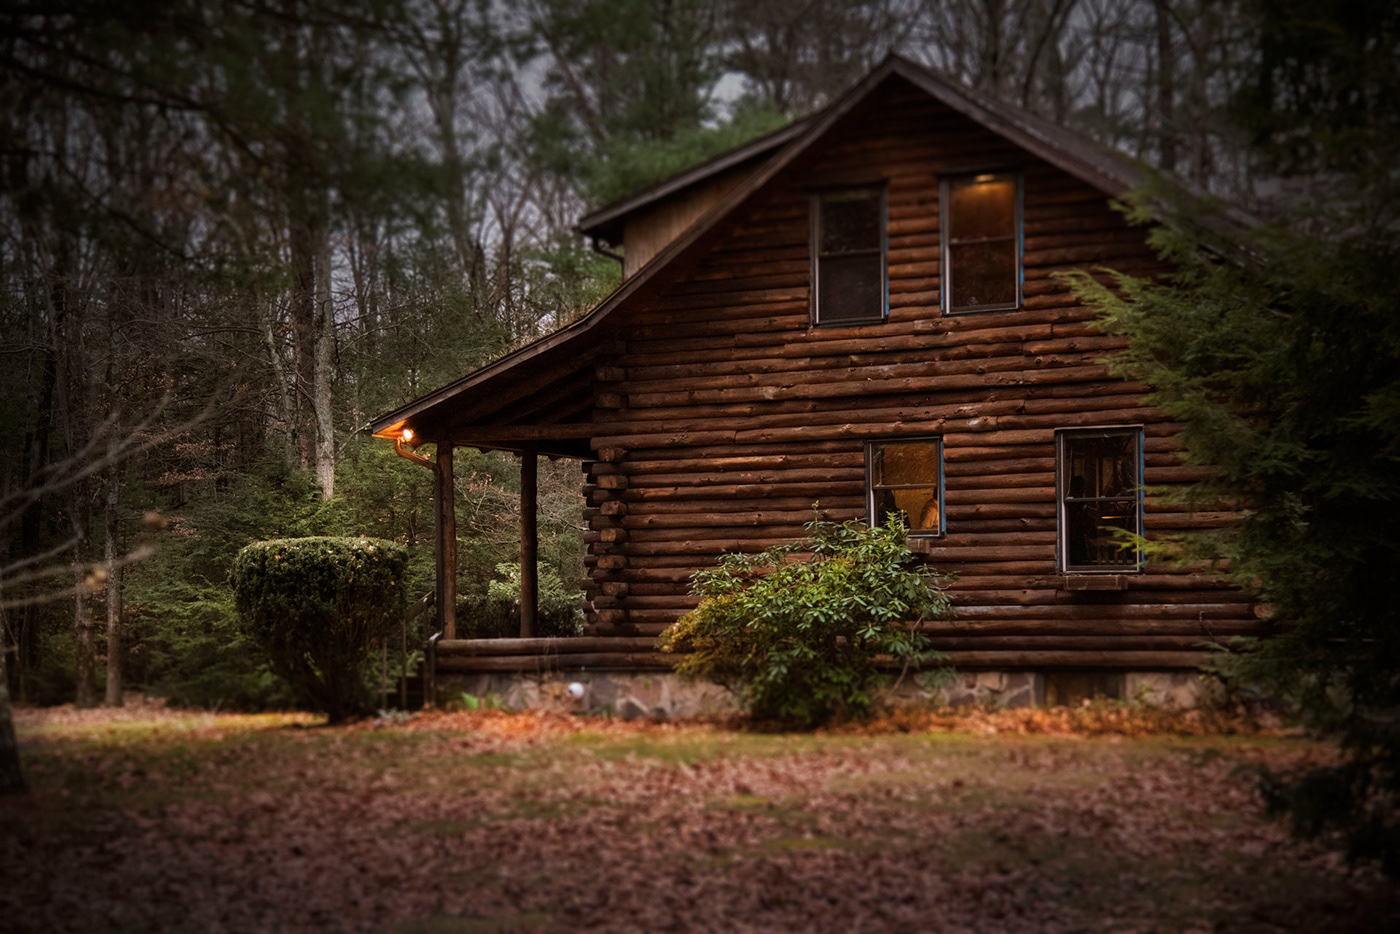 referência: www.pexels.com/photo/brown-cabin-in-the-woods-on-daytime-803975...